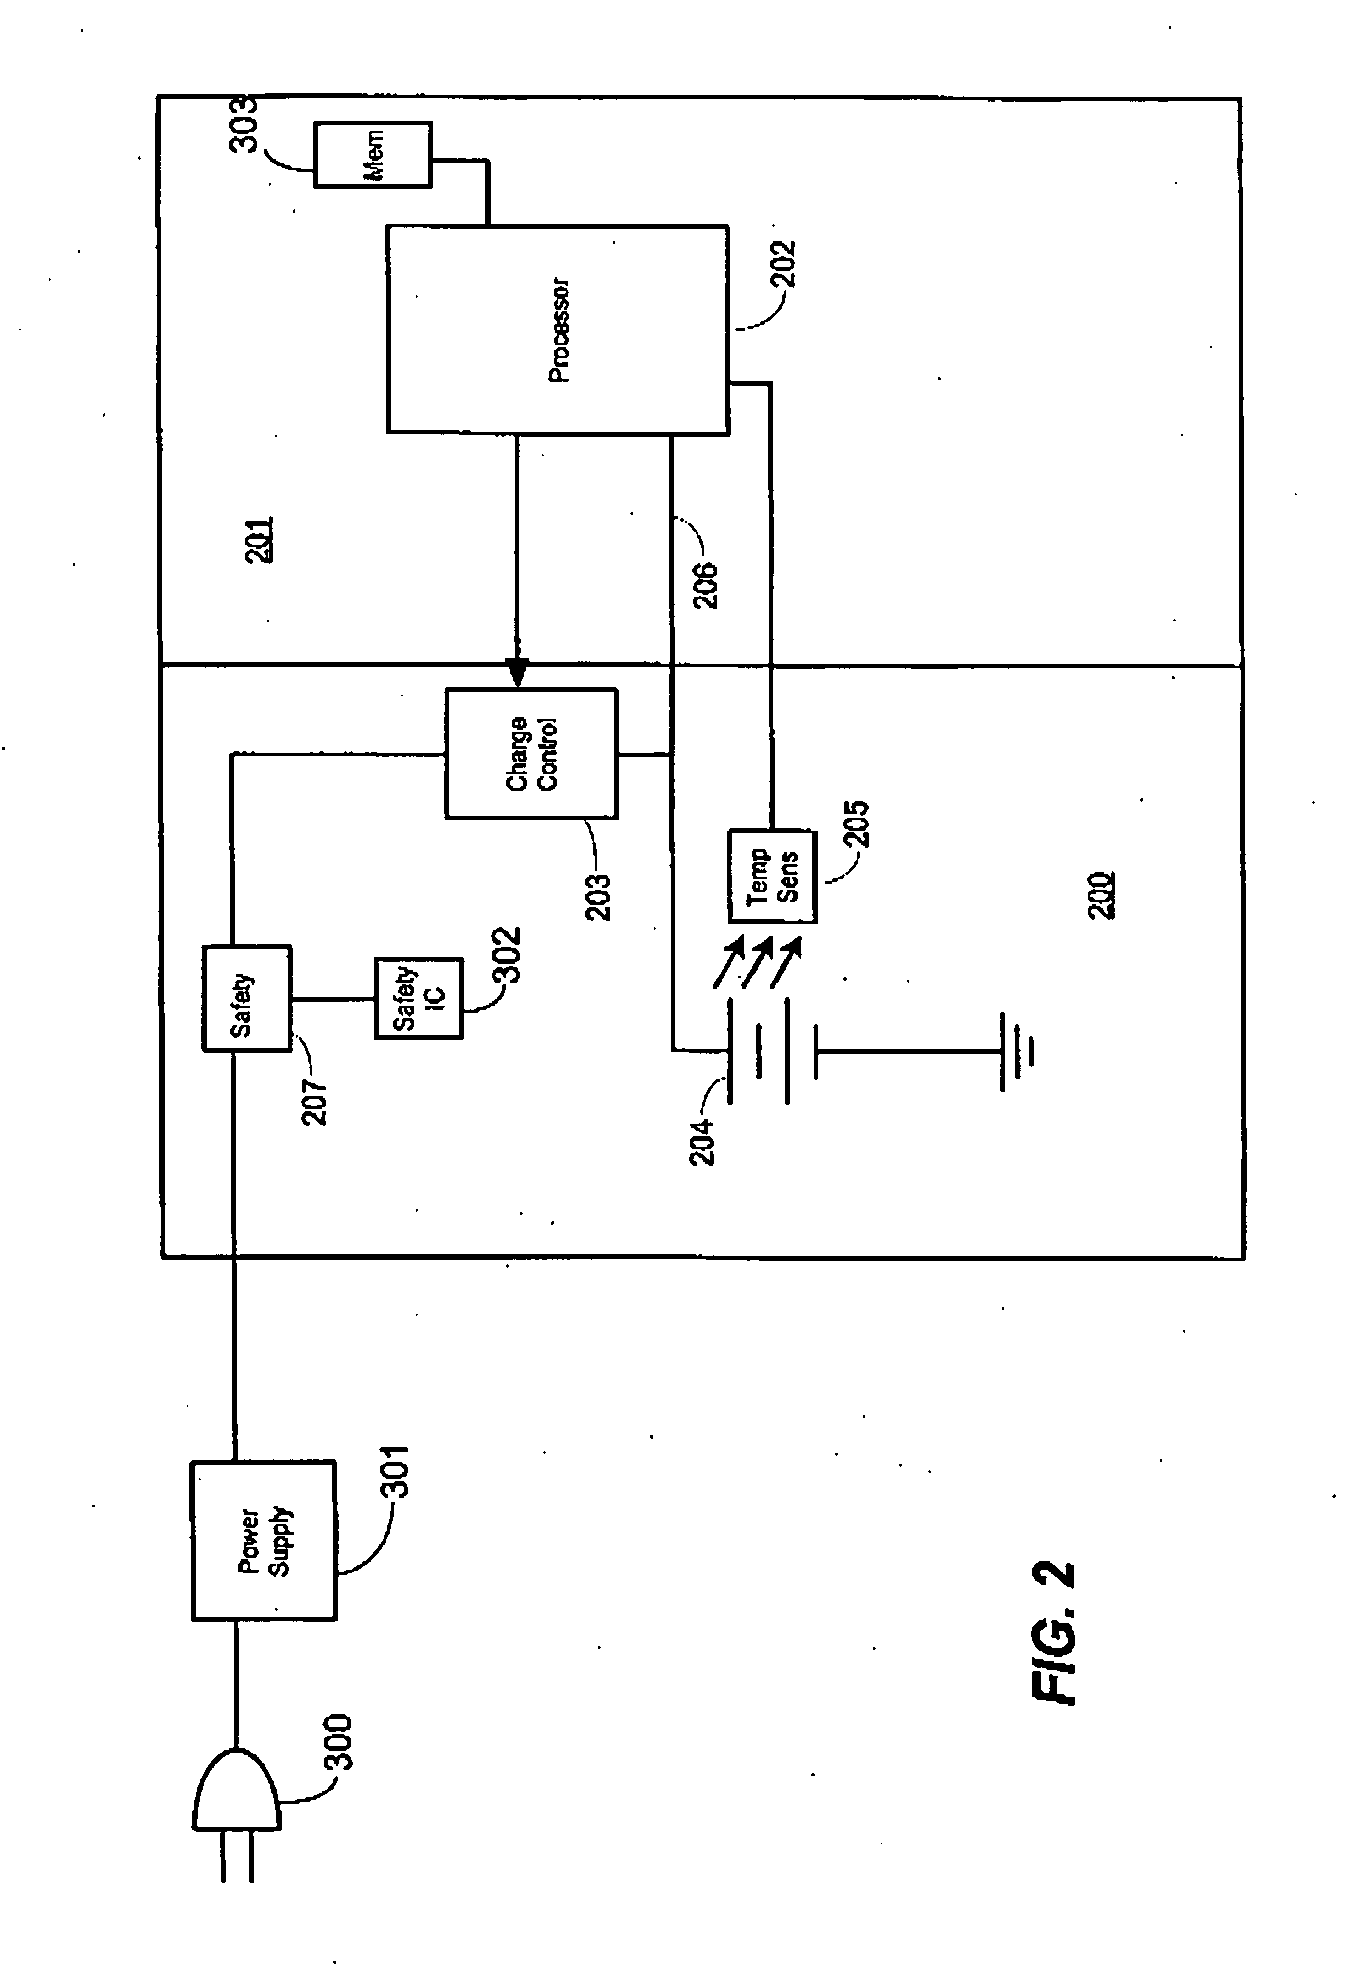 Charging method for extending battery life in the presence of high temperature